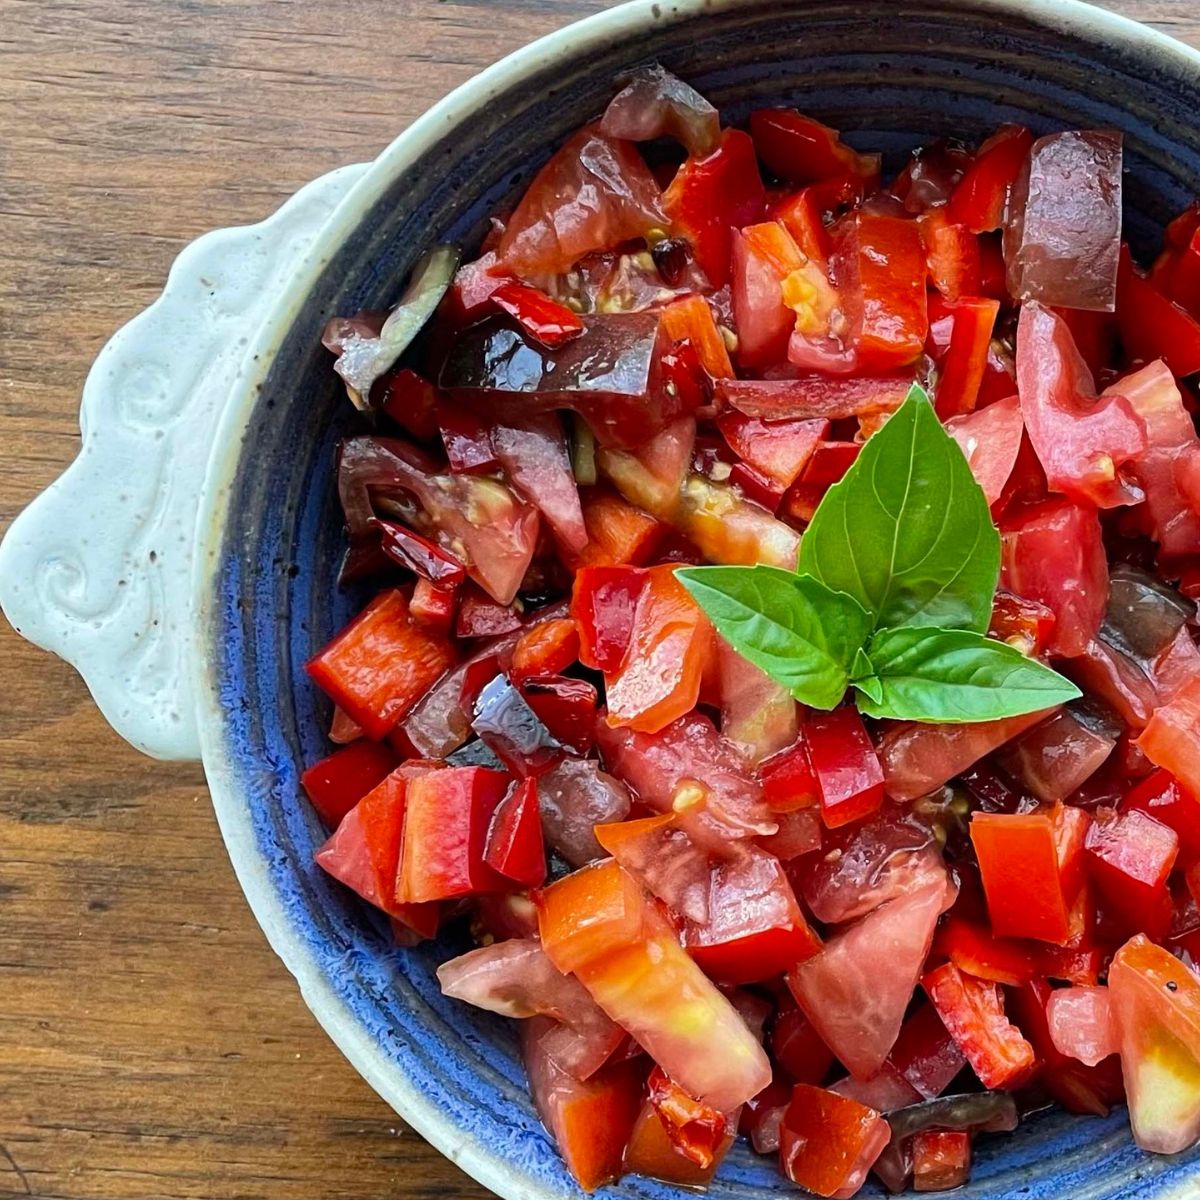 tomato and red pepper salad